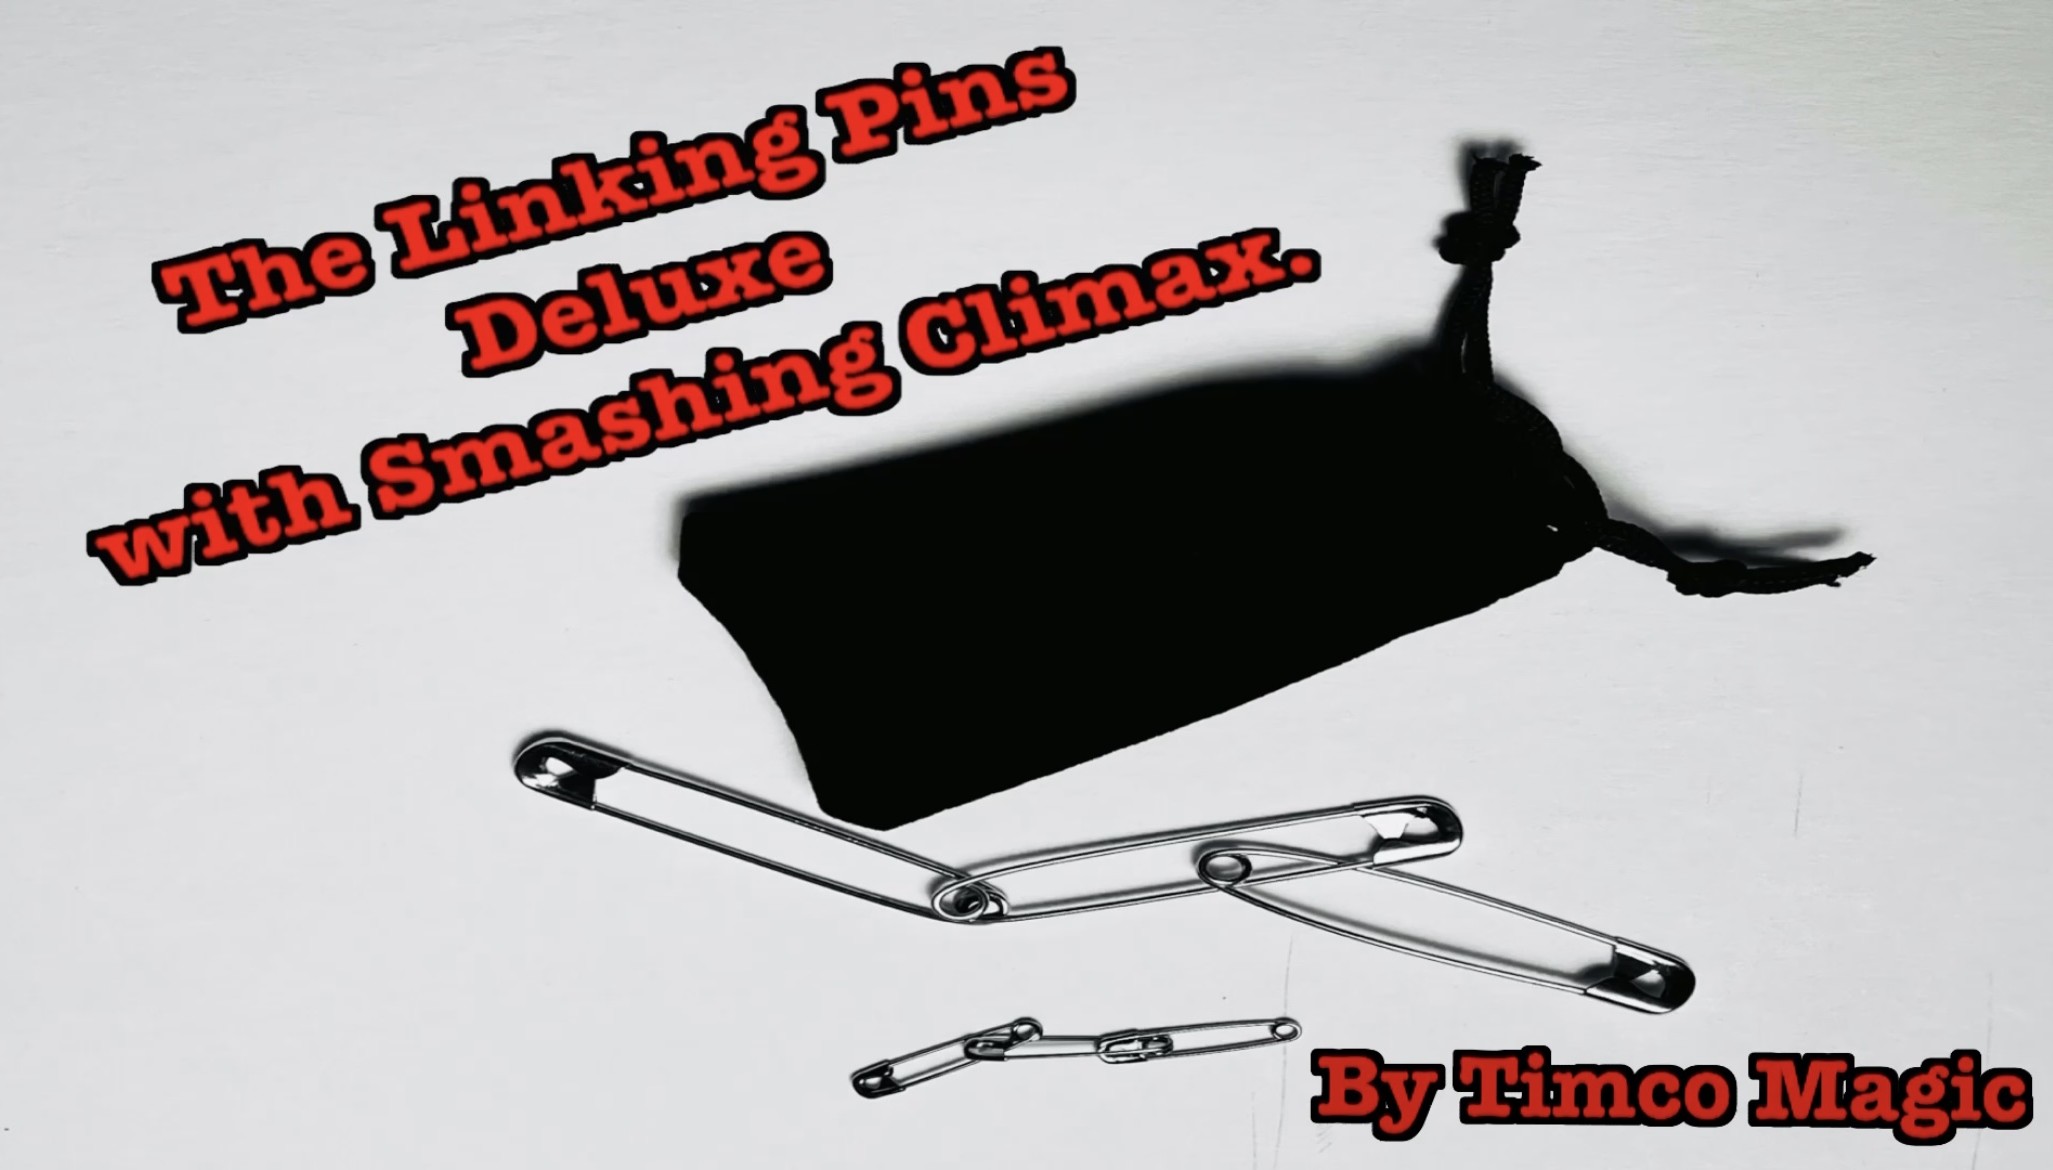 Linking Pins Deluxe with Smash Climax by Timco Magic (watch video)